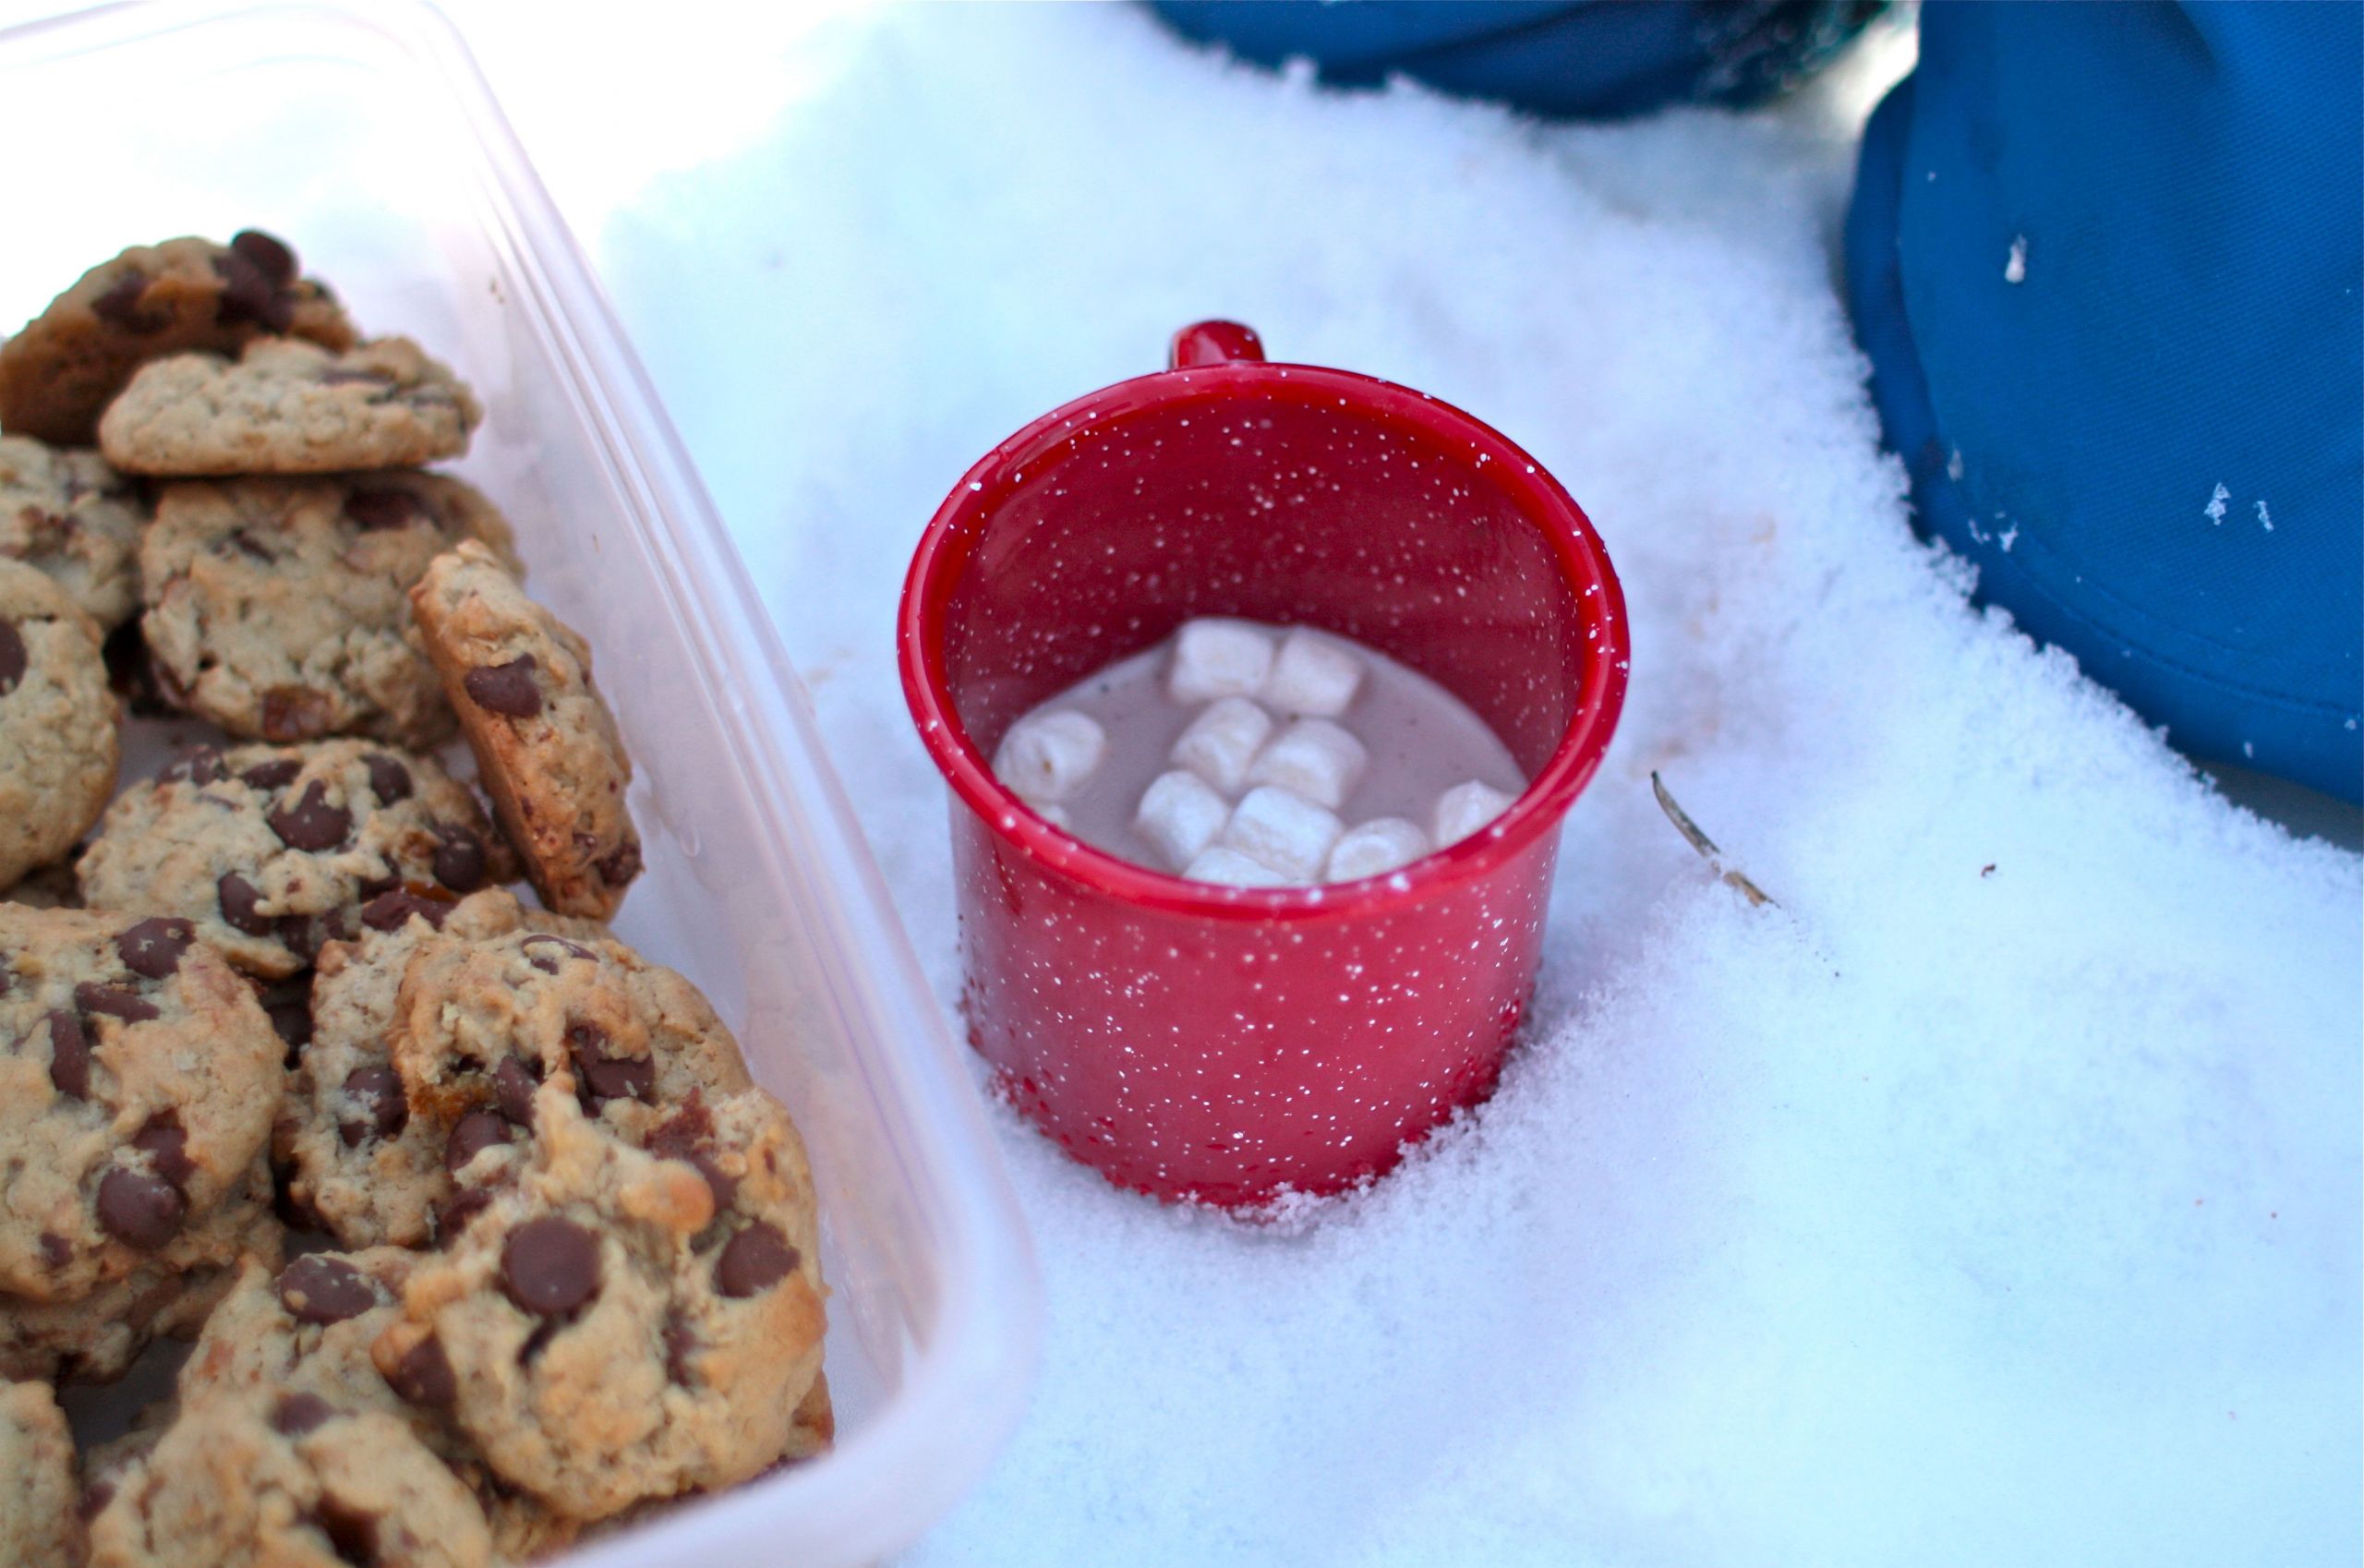 Winter Picnic Ideas
 Ideas and Tips for a Winter Picnic in the Snow